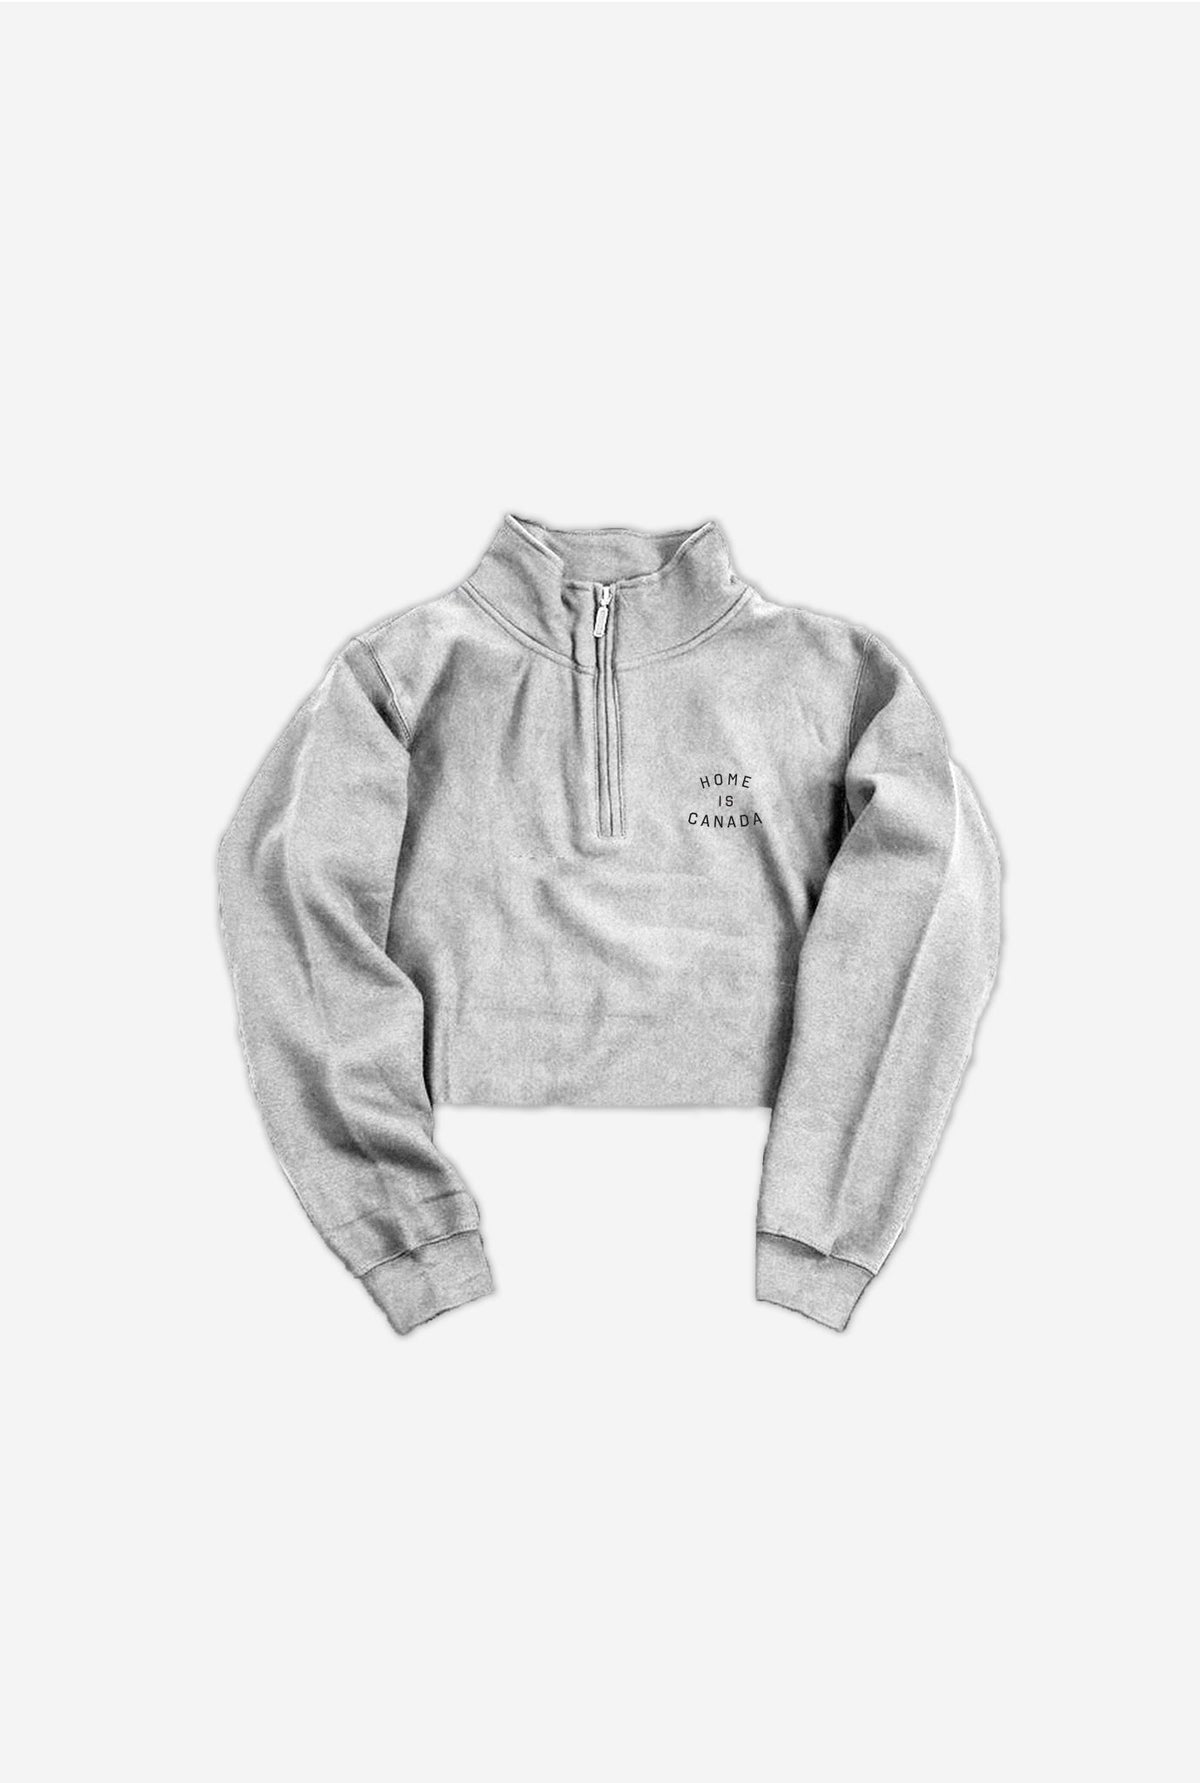 Home is Canada Cropped 1/4 Zip - Grey